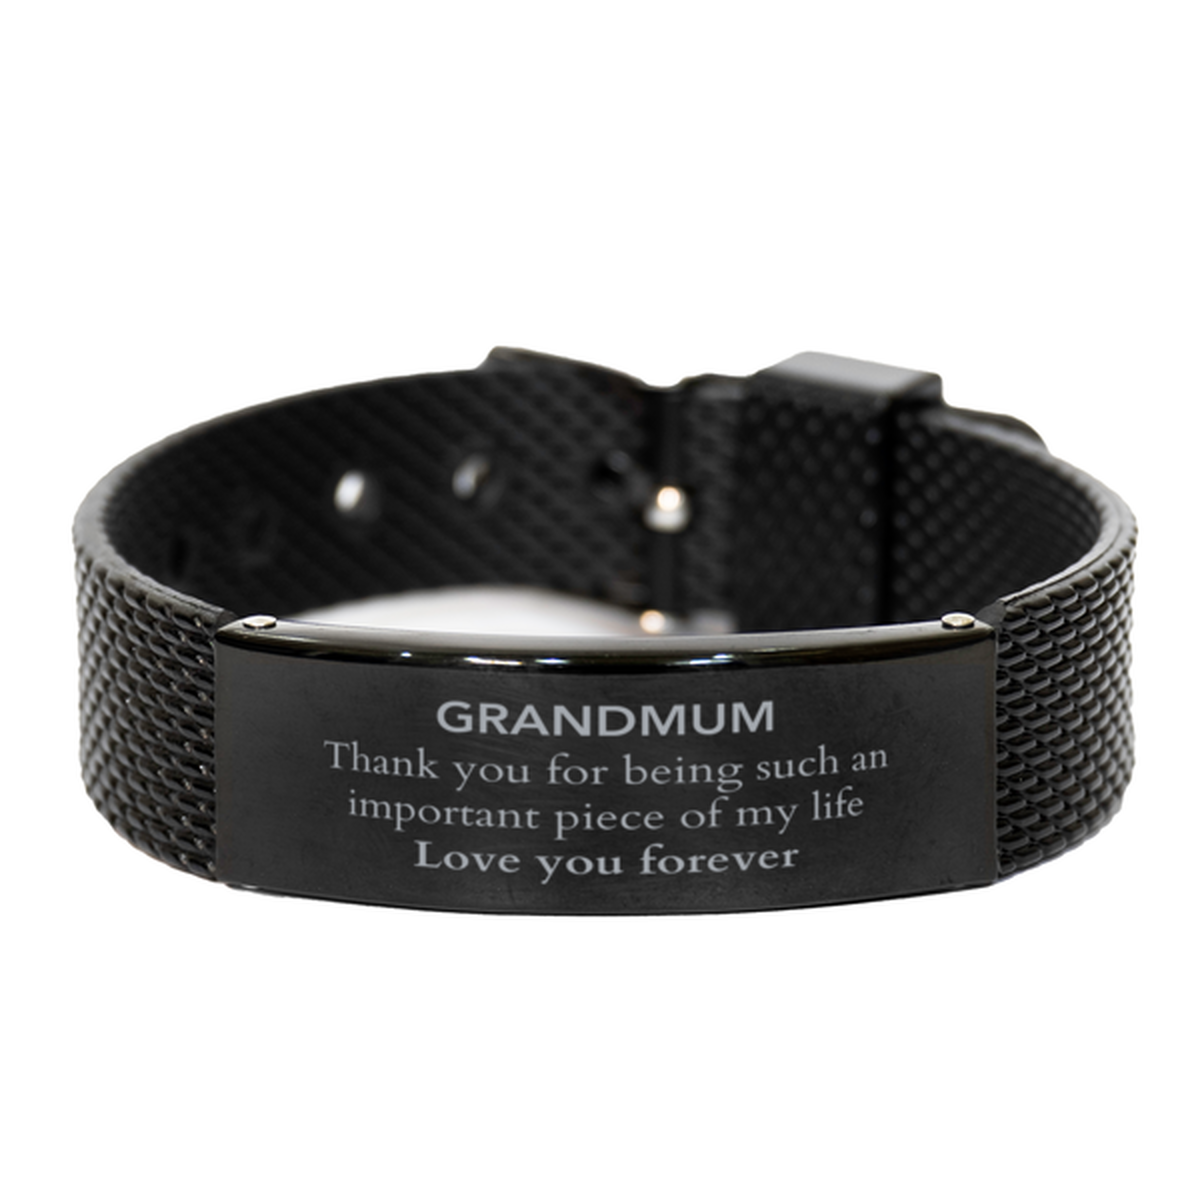 Appropriate Grandmum Black Shark Mesh Bracelet Epic Birthday Gifts for Grandmum Thank you for being such an important piece of my life Grandmum Christmas Mothers Fathers Day